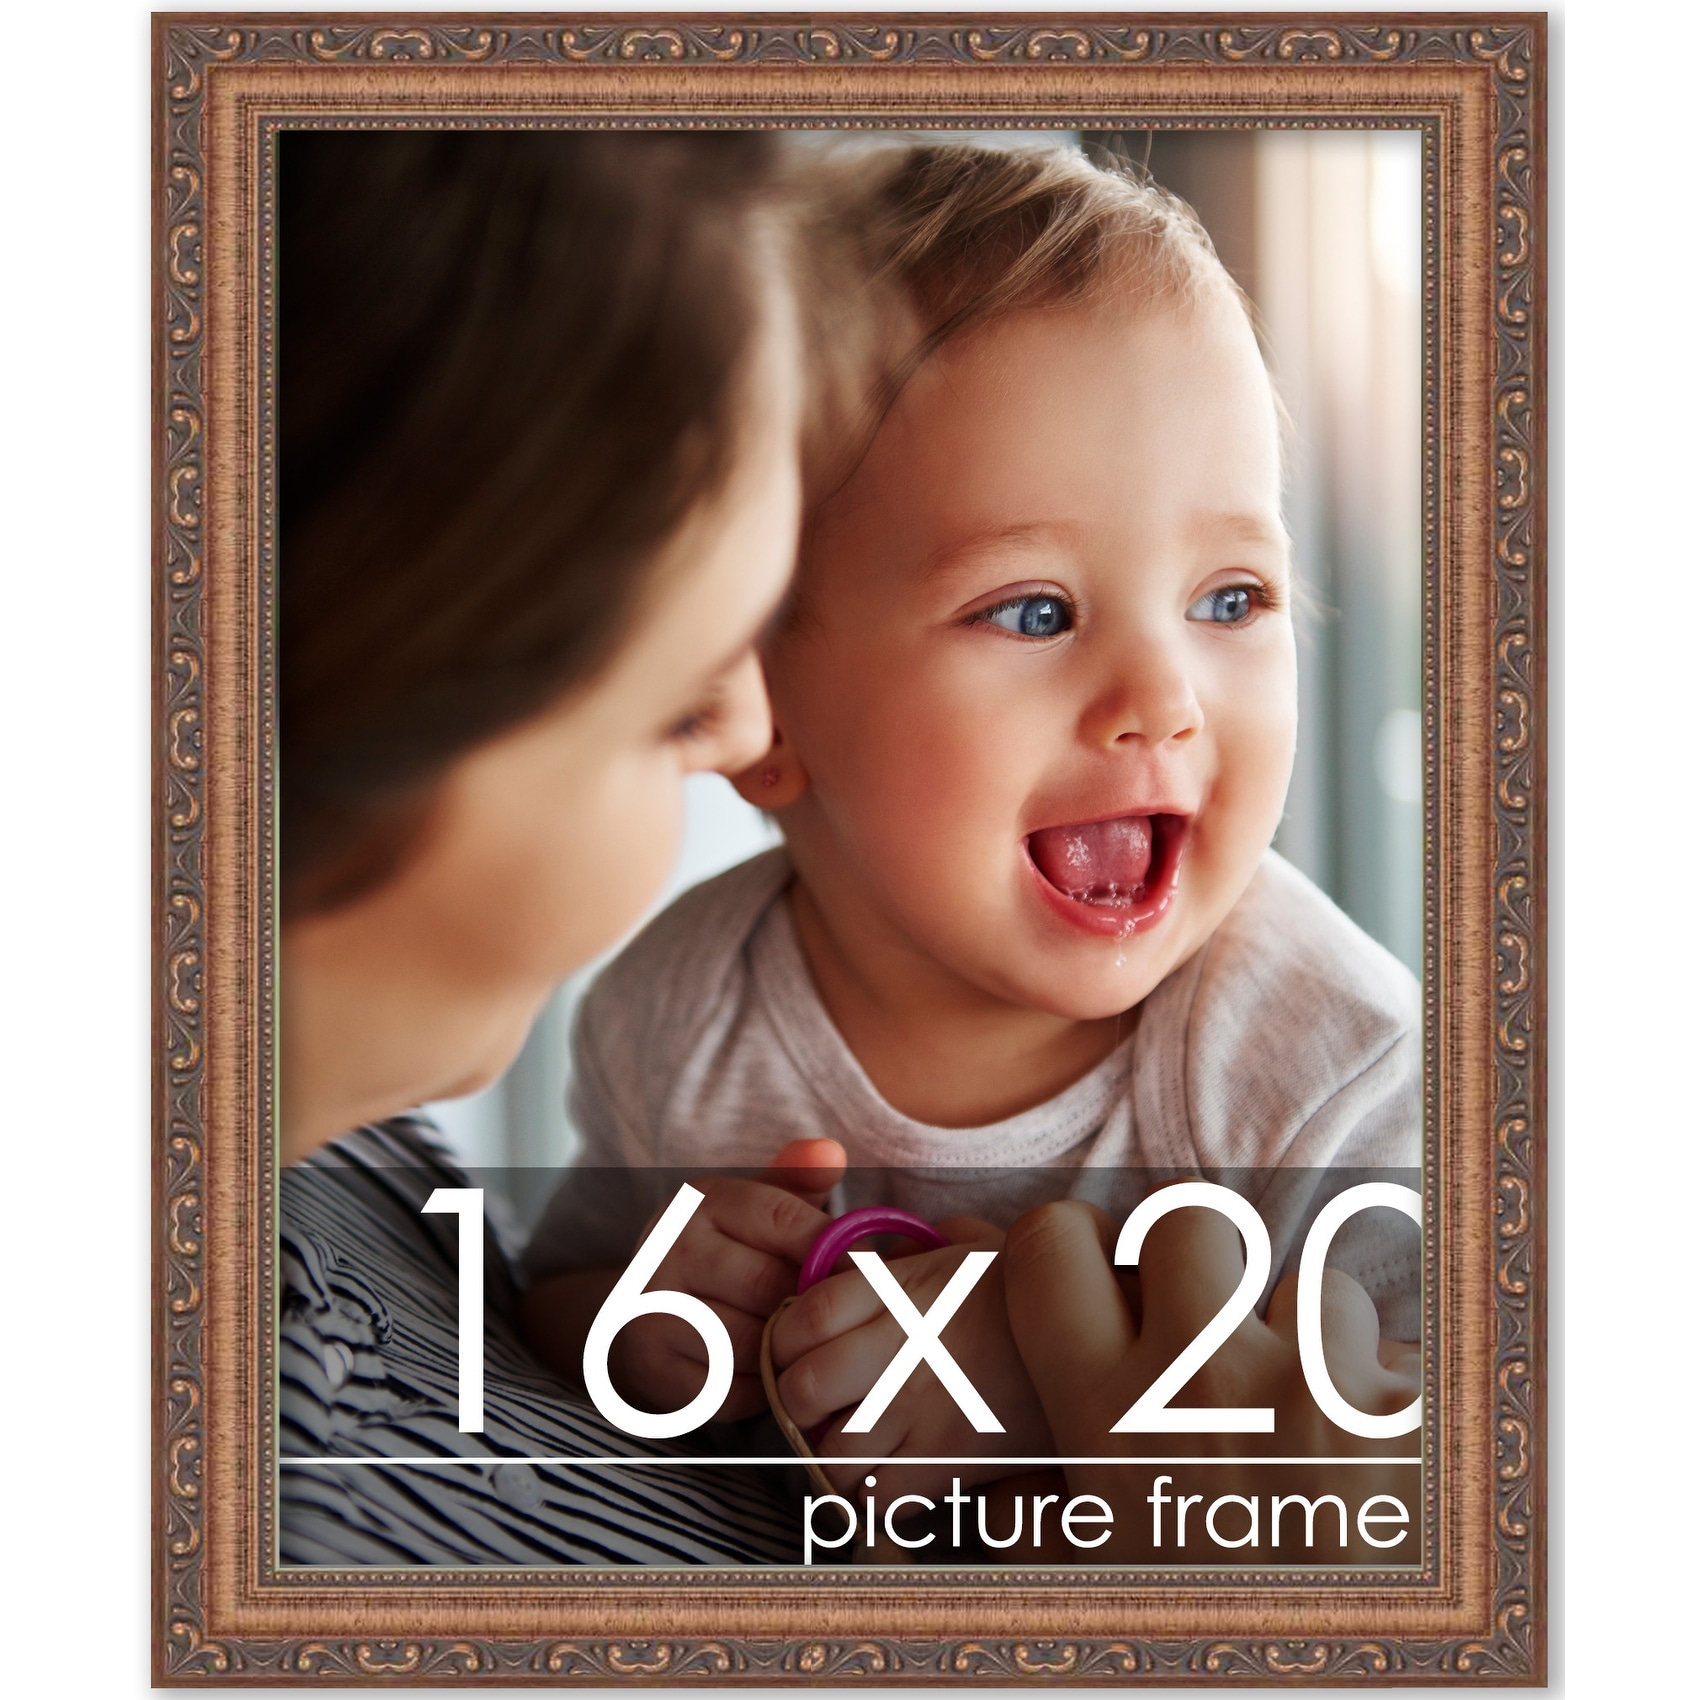 16x20 Ornate Antique Gold Complete Wood Picture Frame with UV Acrylic, Foam Board Backing, & Hardware